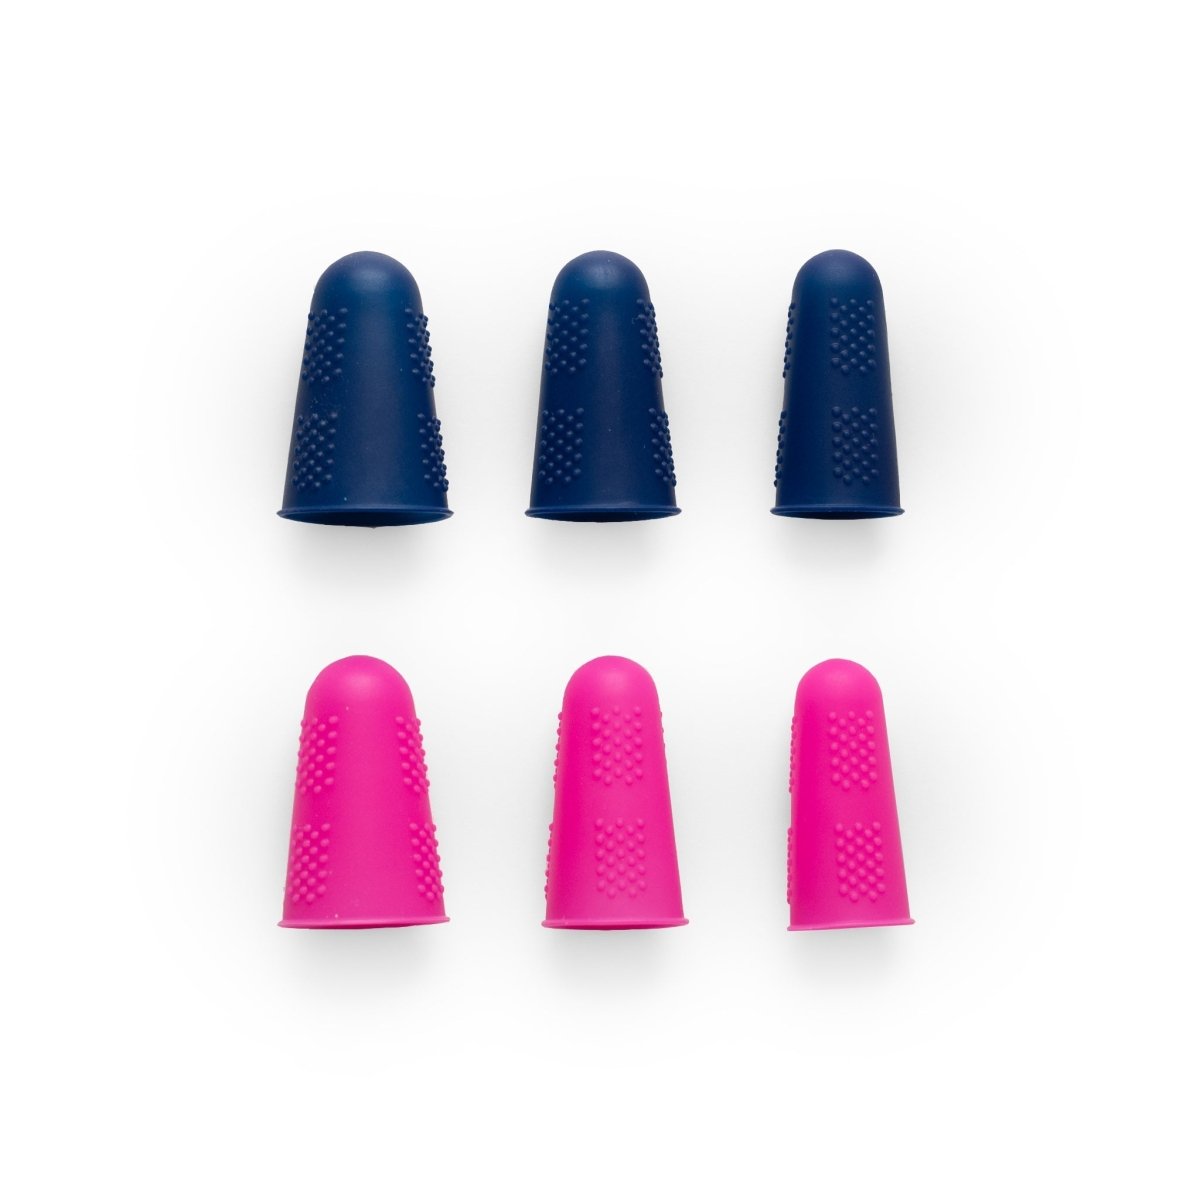 Tools Silicone Thimbles Hot Pink (includes 3 thimbles) from Cara & Co Craft Supply